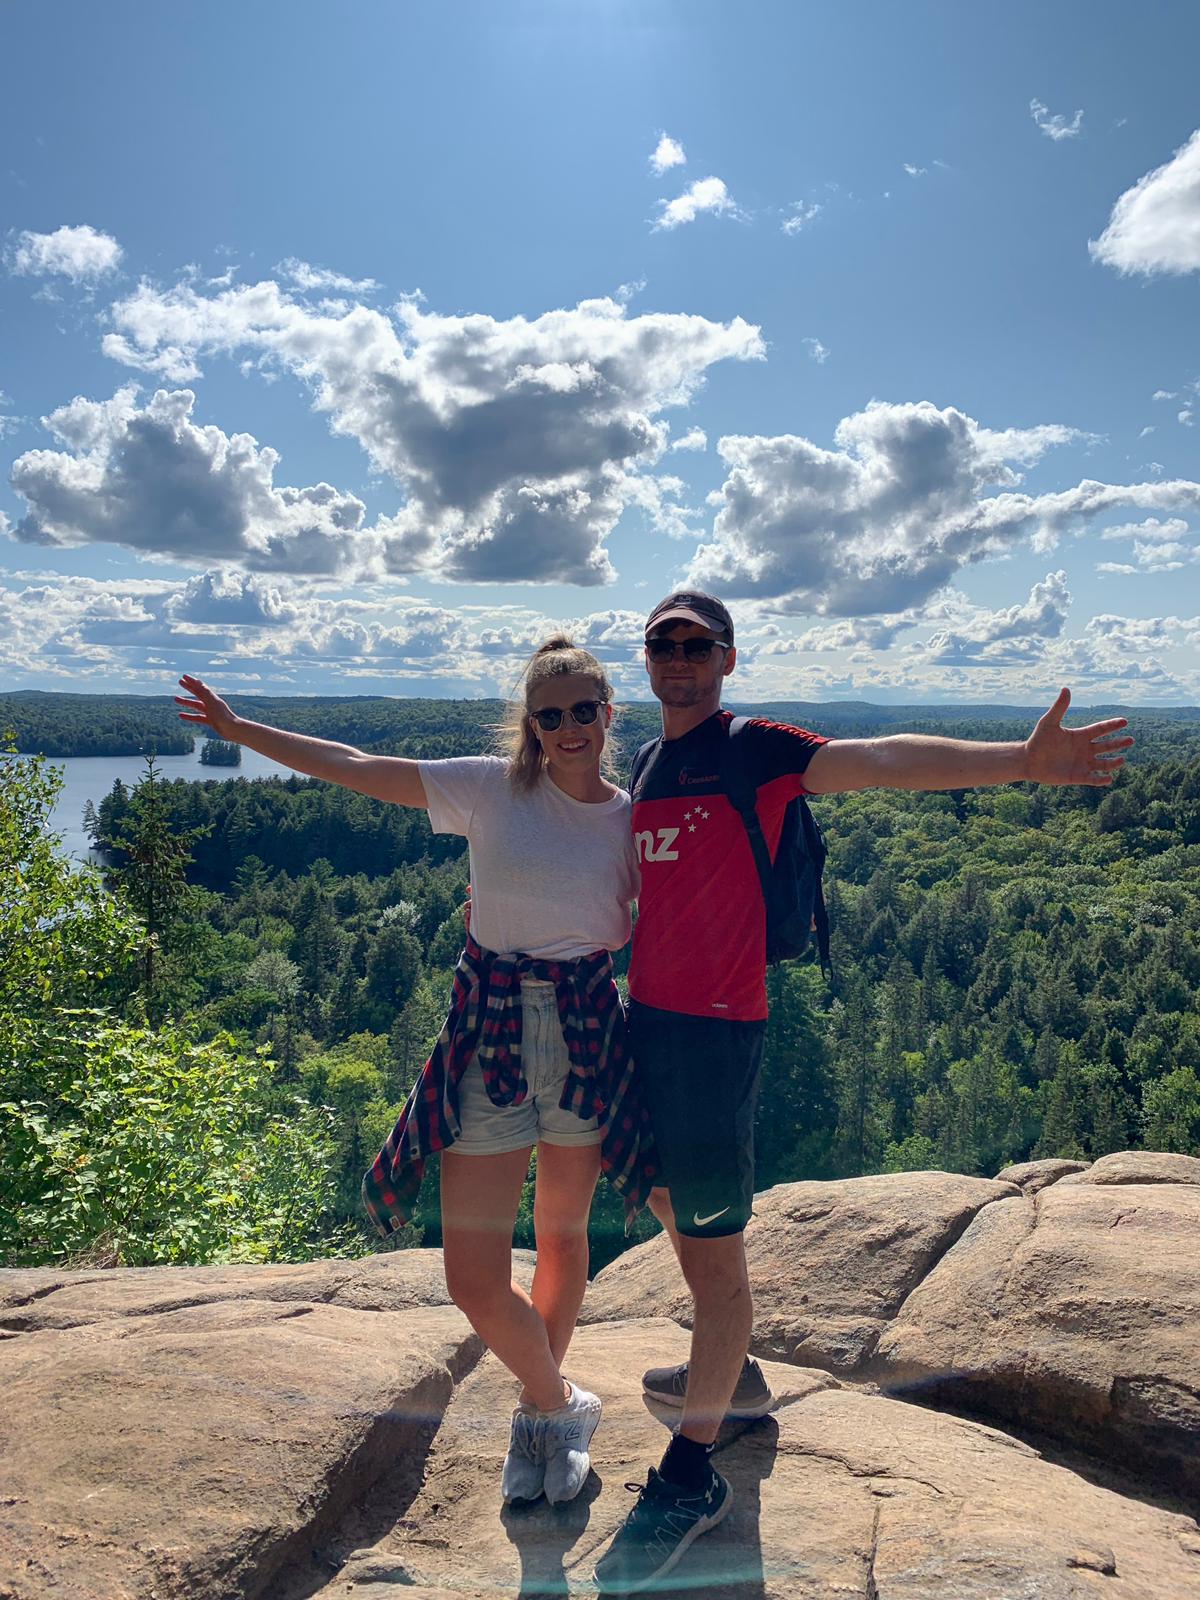 Two people stand with their arms outstretched on top of rocks overlooking a forest and water